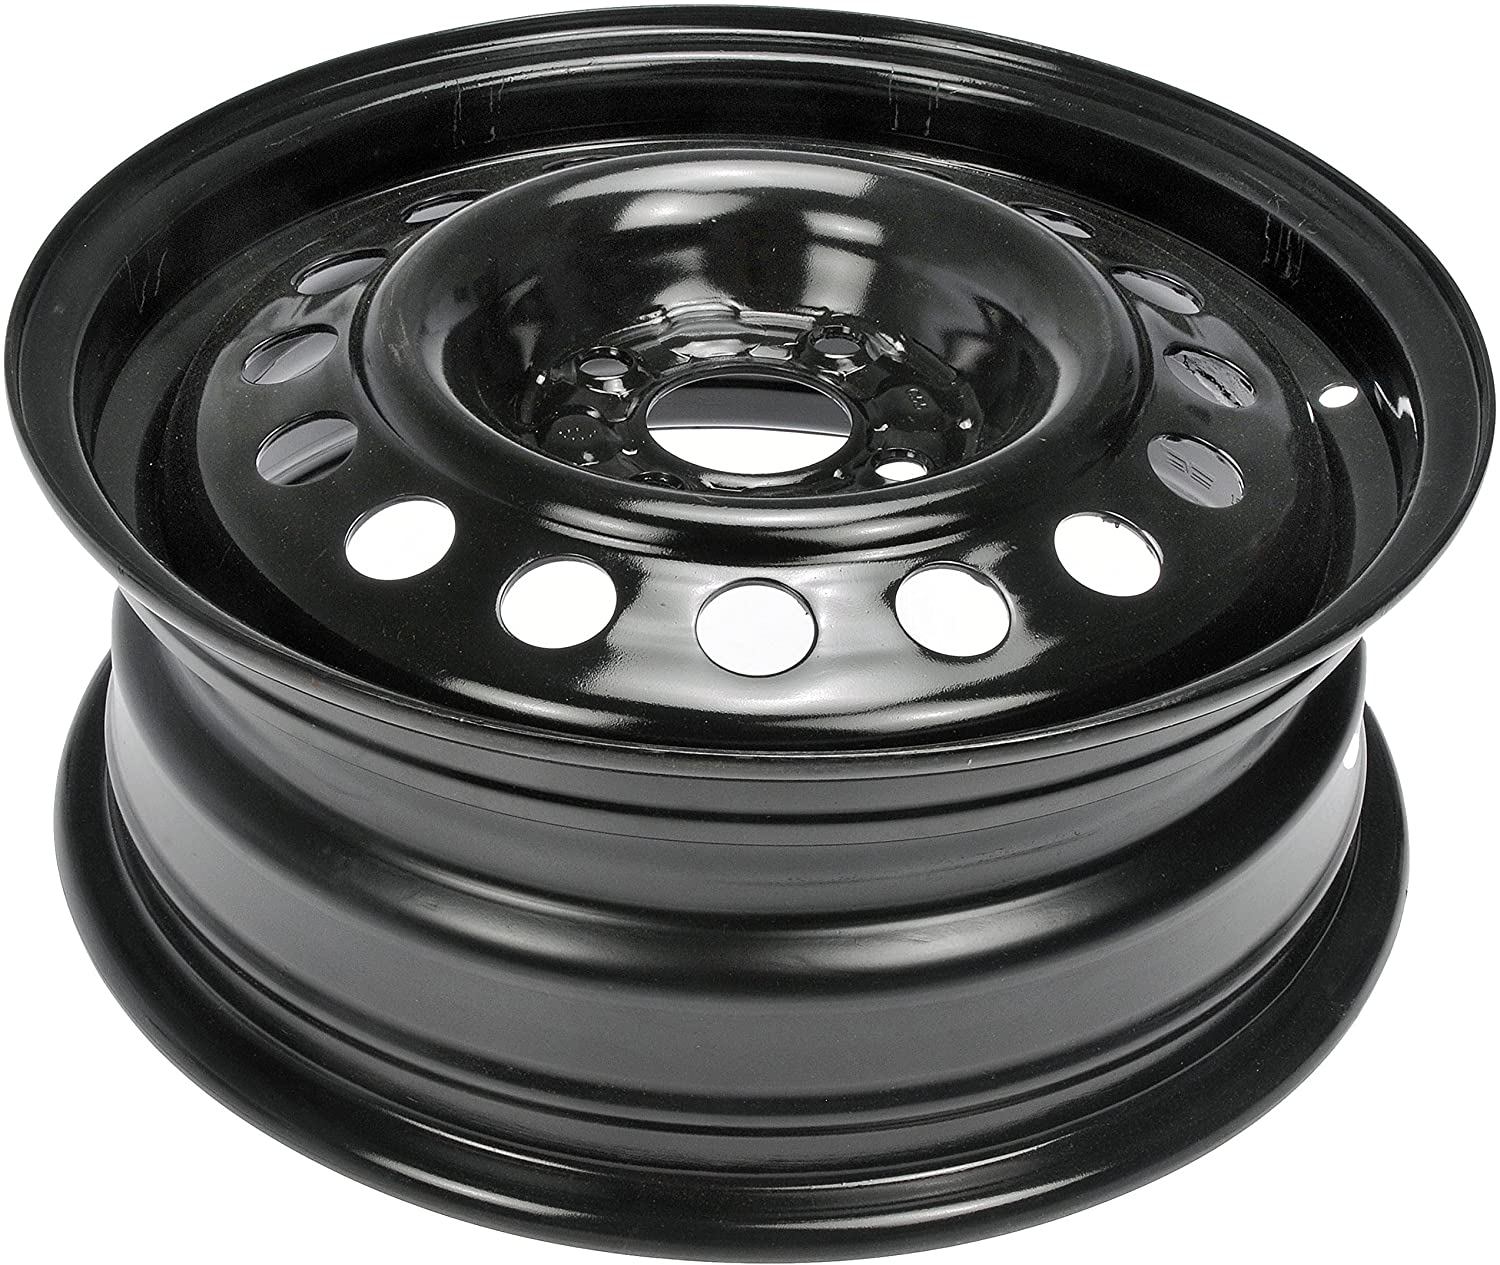 Dorman Black Wheel with Painted Finish (15 x 5.5 inches /4 x 3 inches, 40 mm Offset)